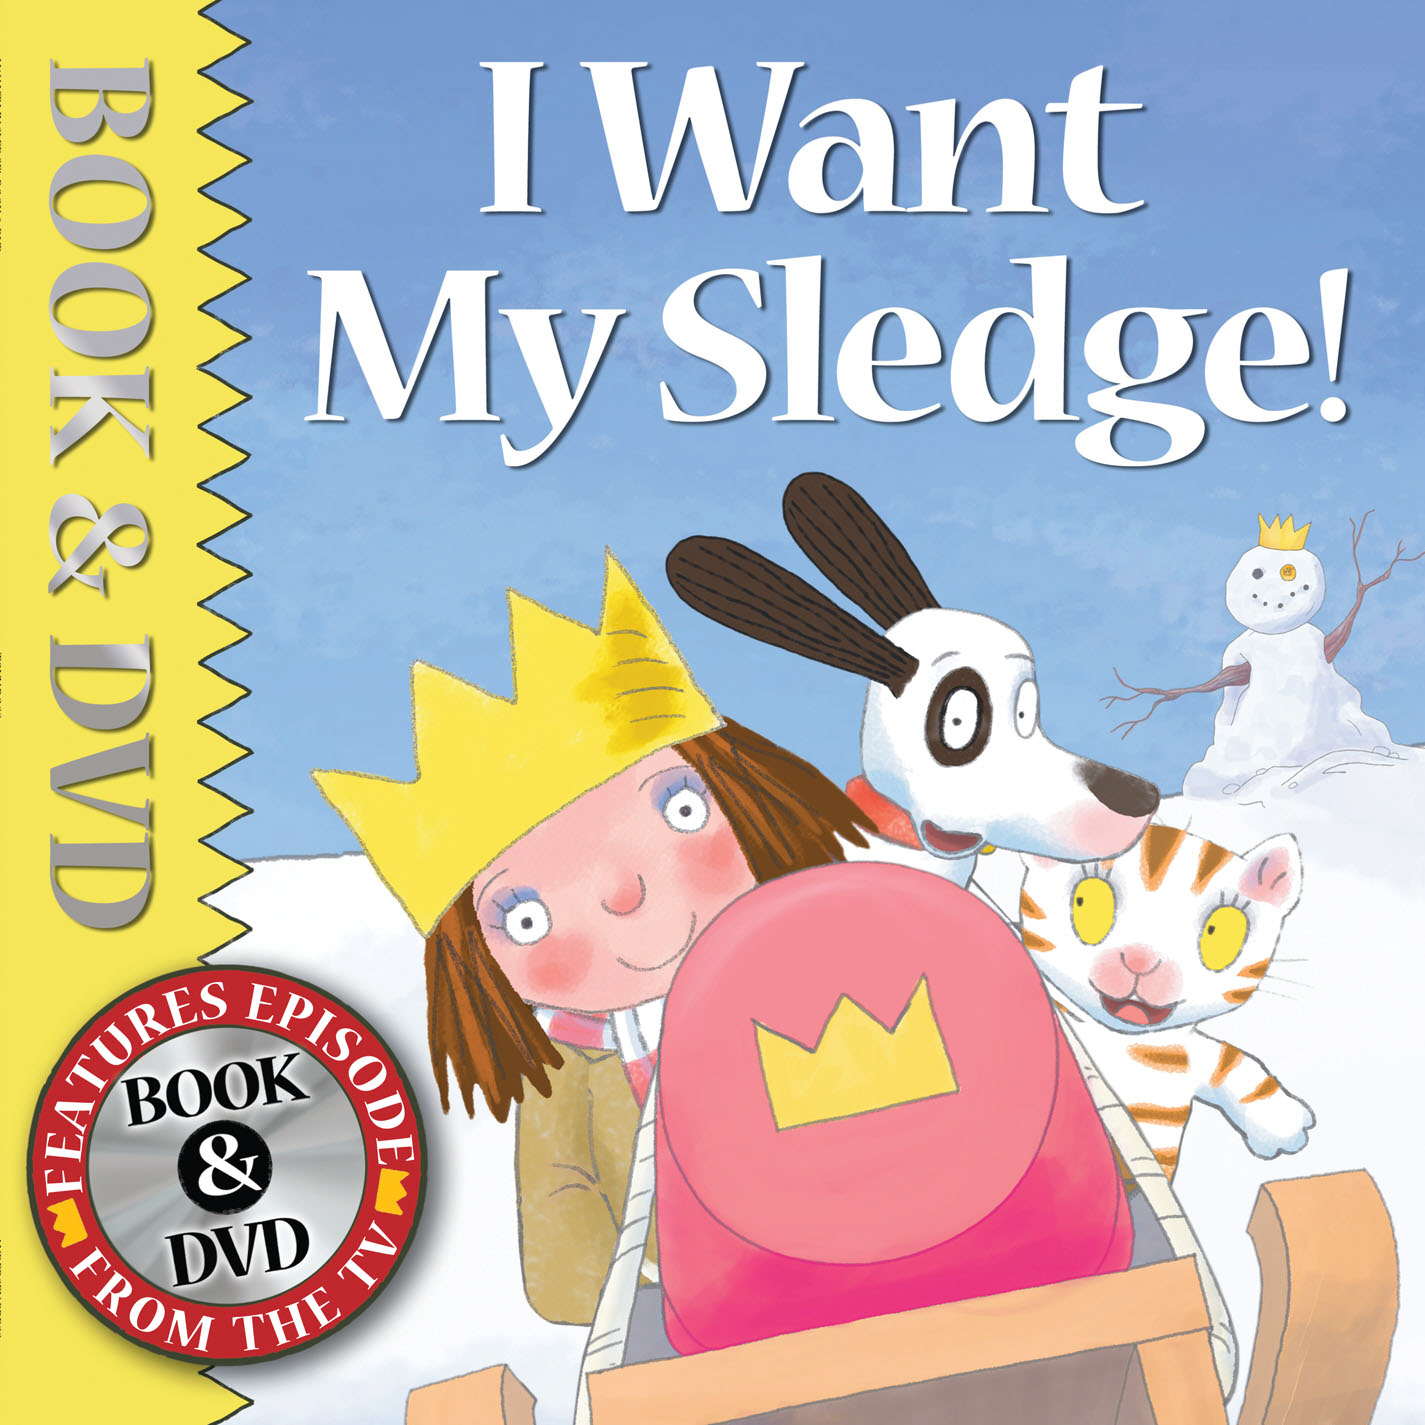 I Want My Sledge! (book and DVD)